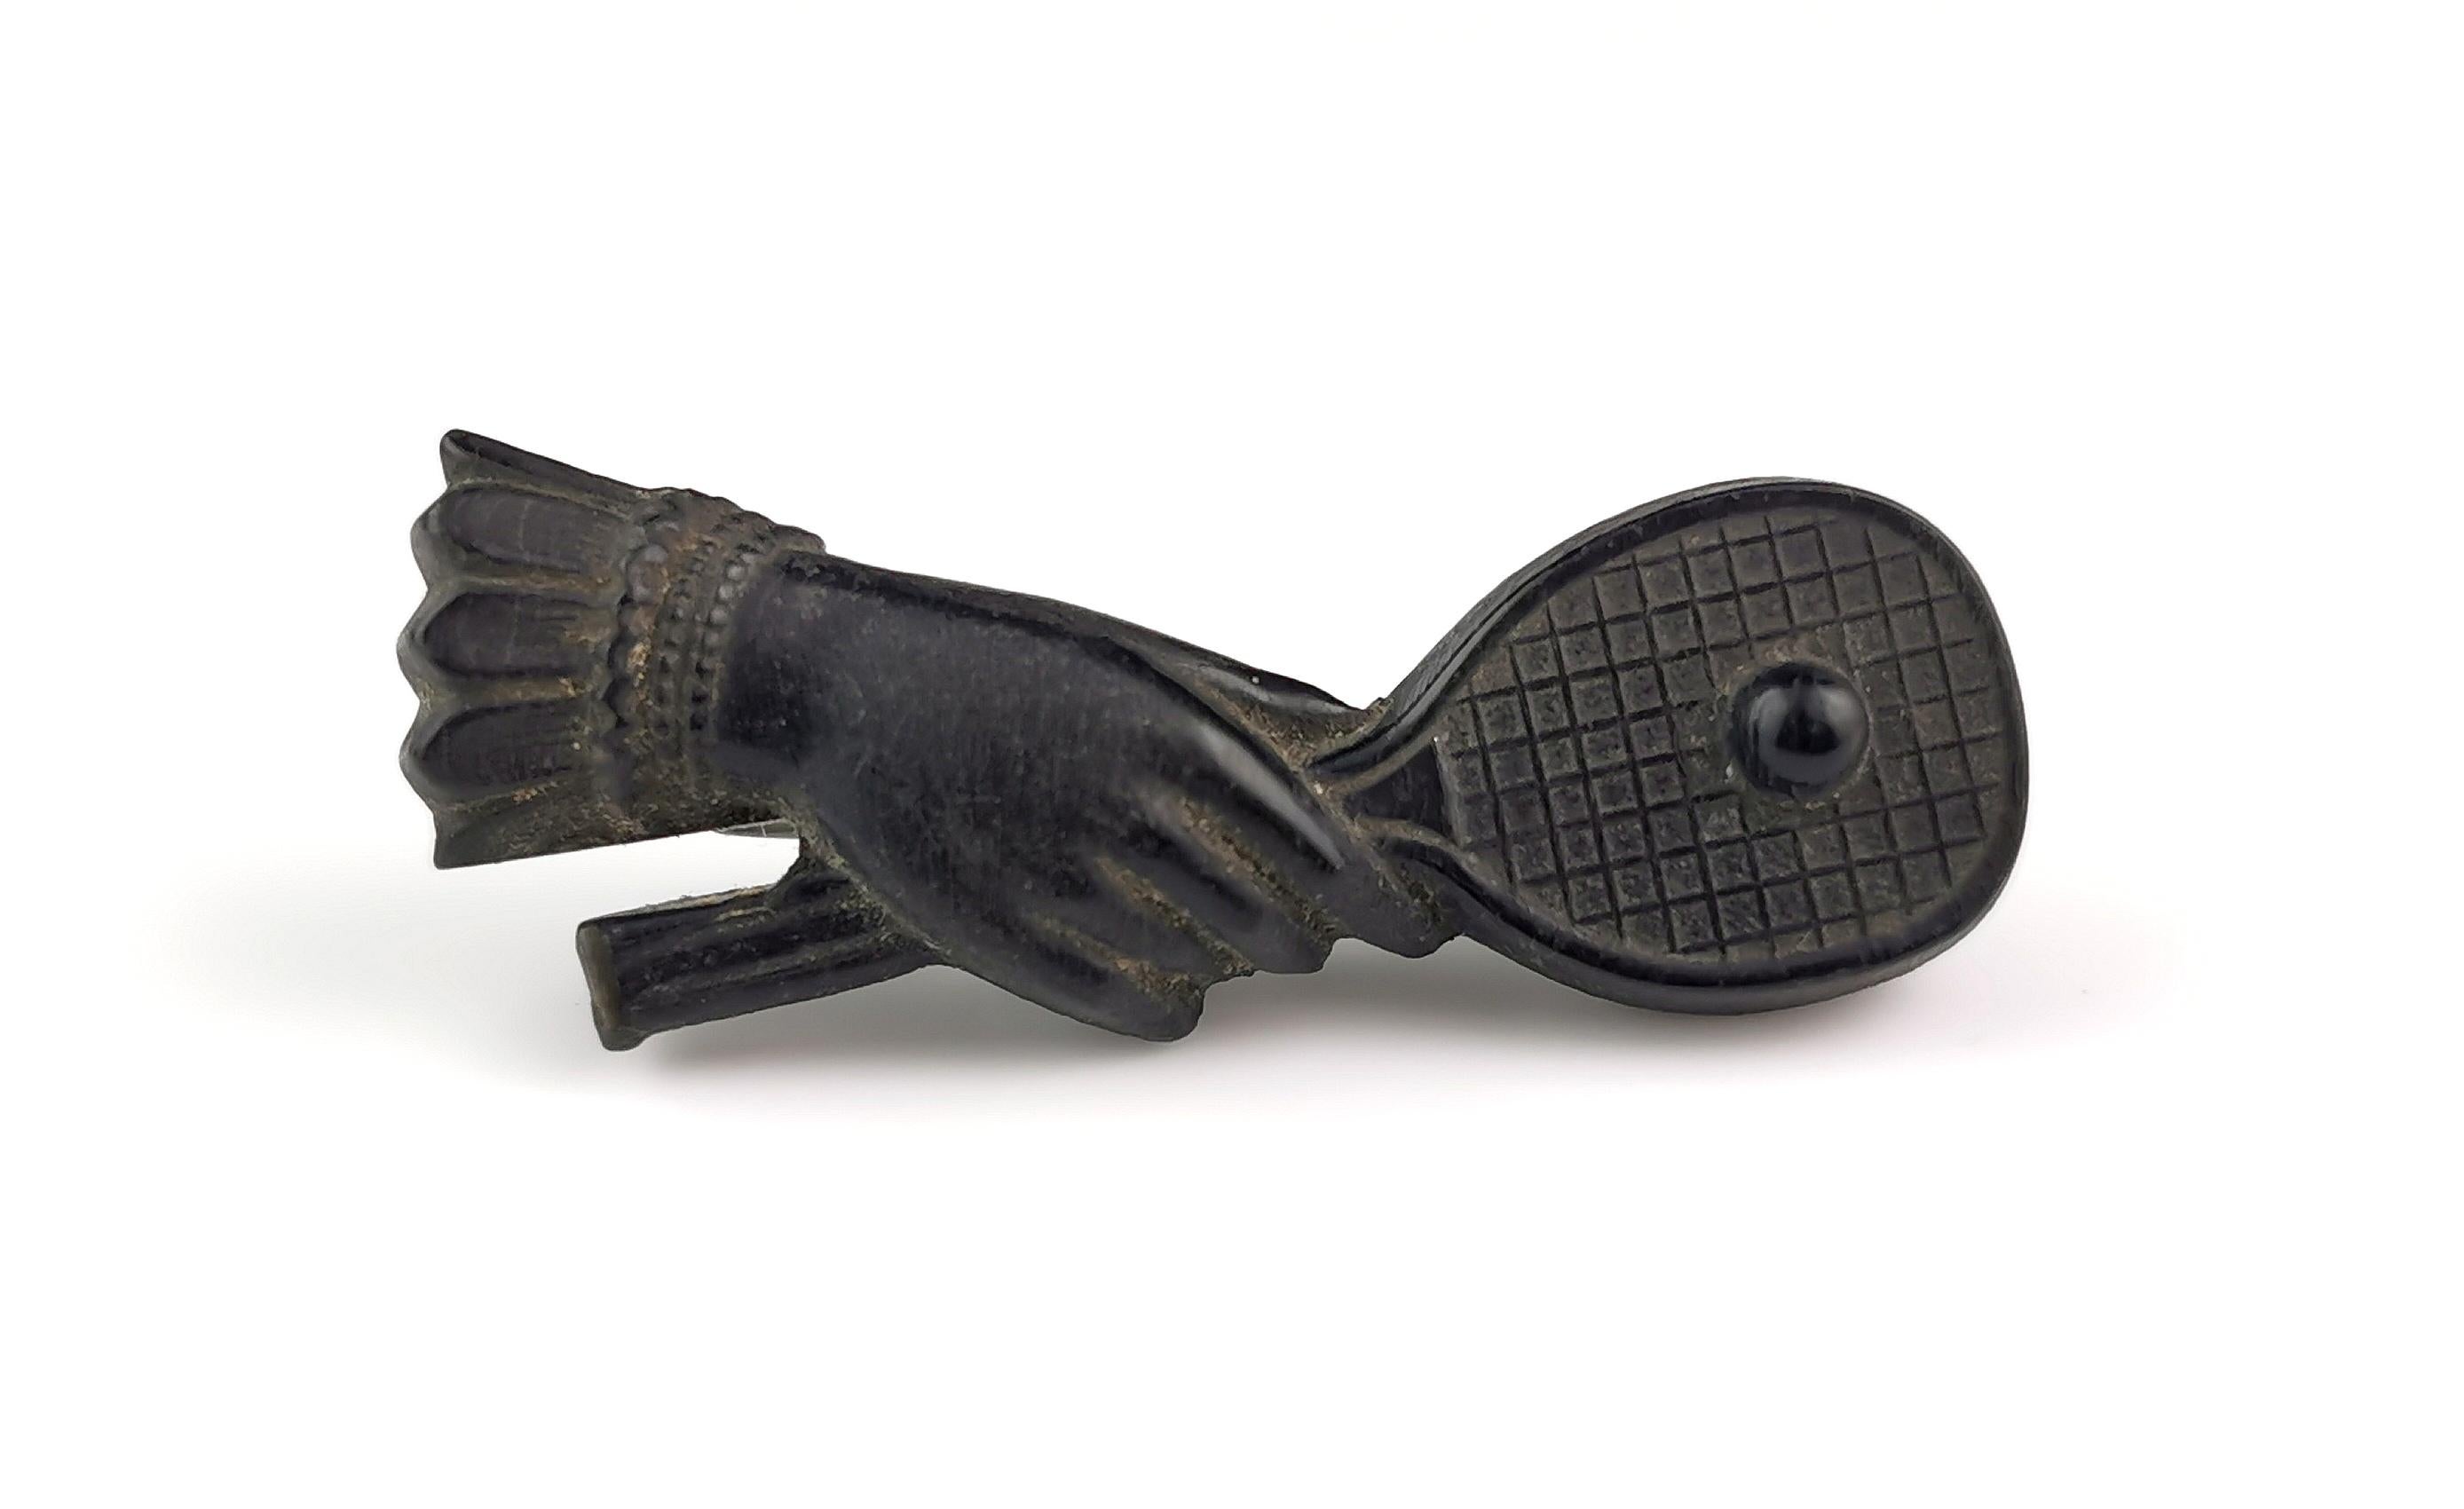 An interesting and well detailed antique Victorian tennis brooch.

It features a cuffed hand holding a tennis racket with a ball.

The brooch is made from bog oak and further lacquered black.

It is has an old c type clasp and pin fastener this is